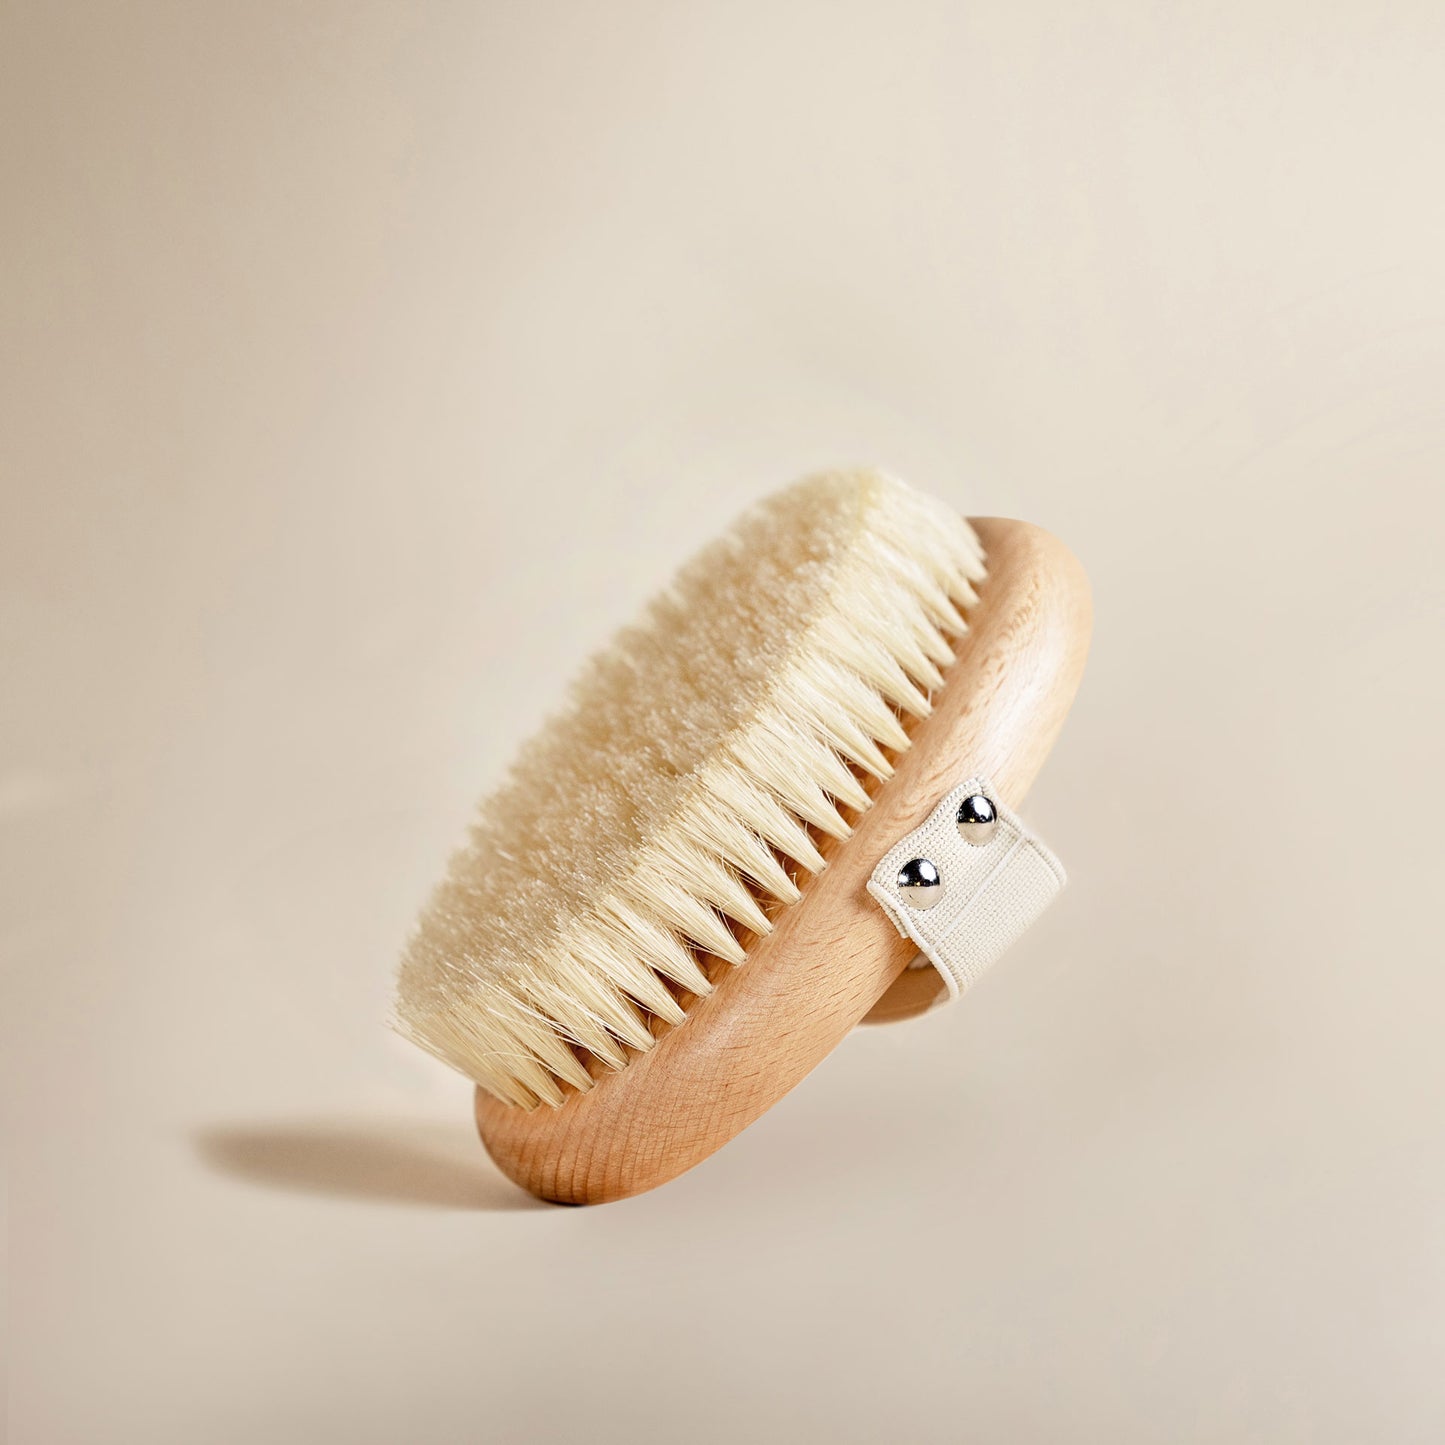 Ultimate Body Brush Set for Improved Wellbeing & Skin Health